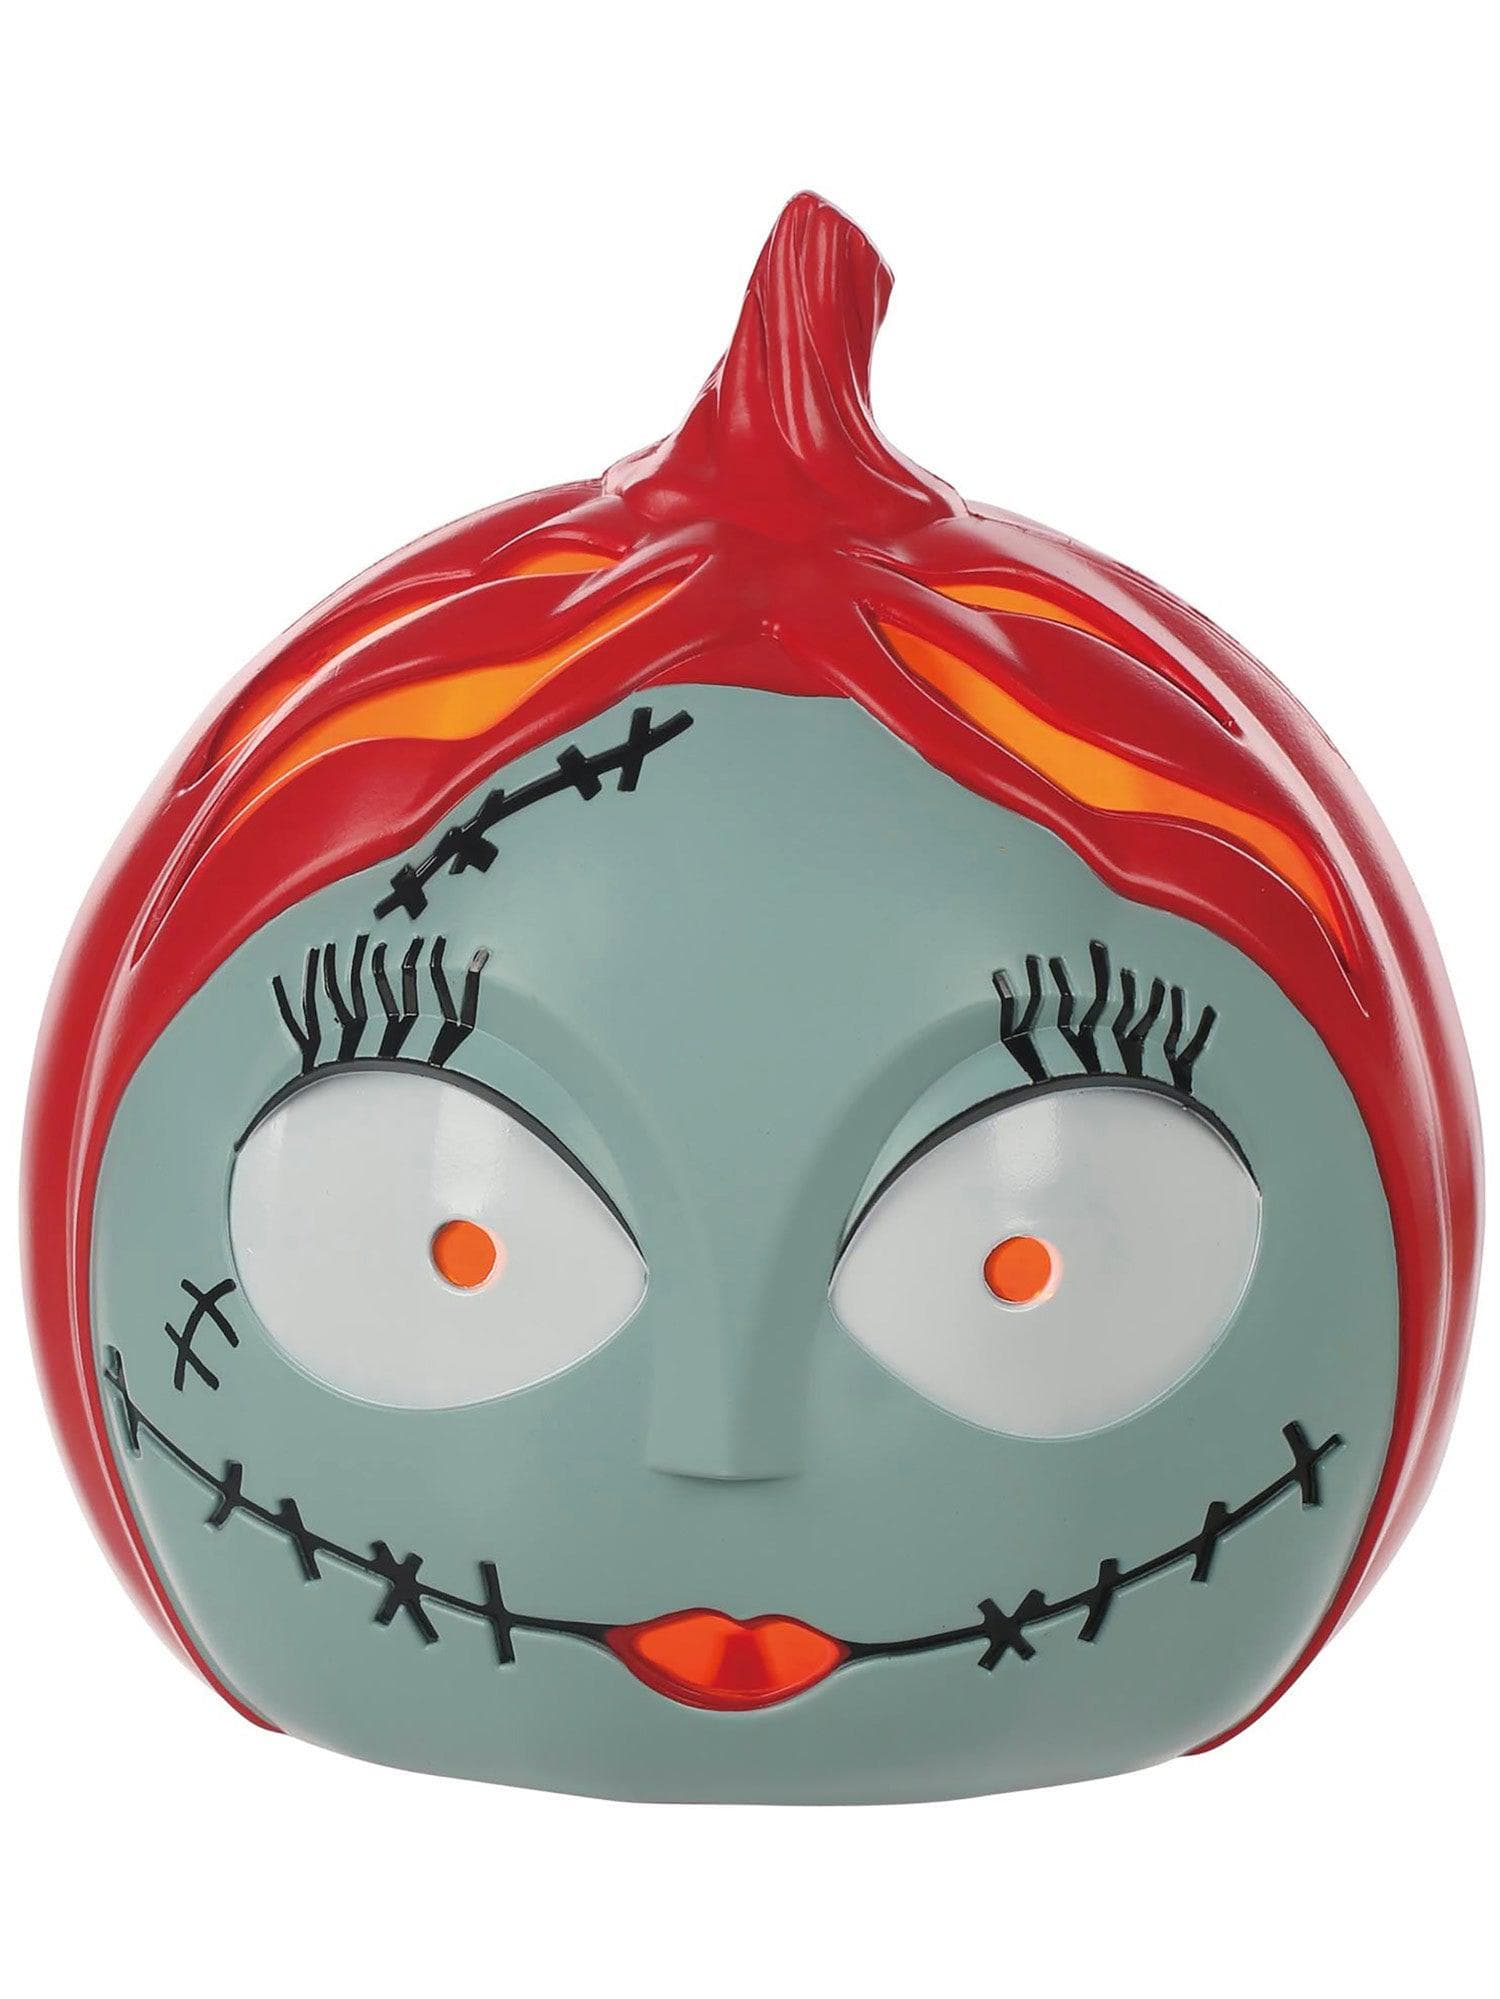 10 Inch The Nightmare Before Christmas Sally  Light Up Pumpkin - costumes.com